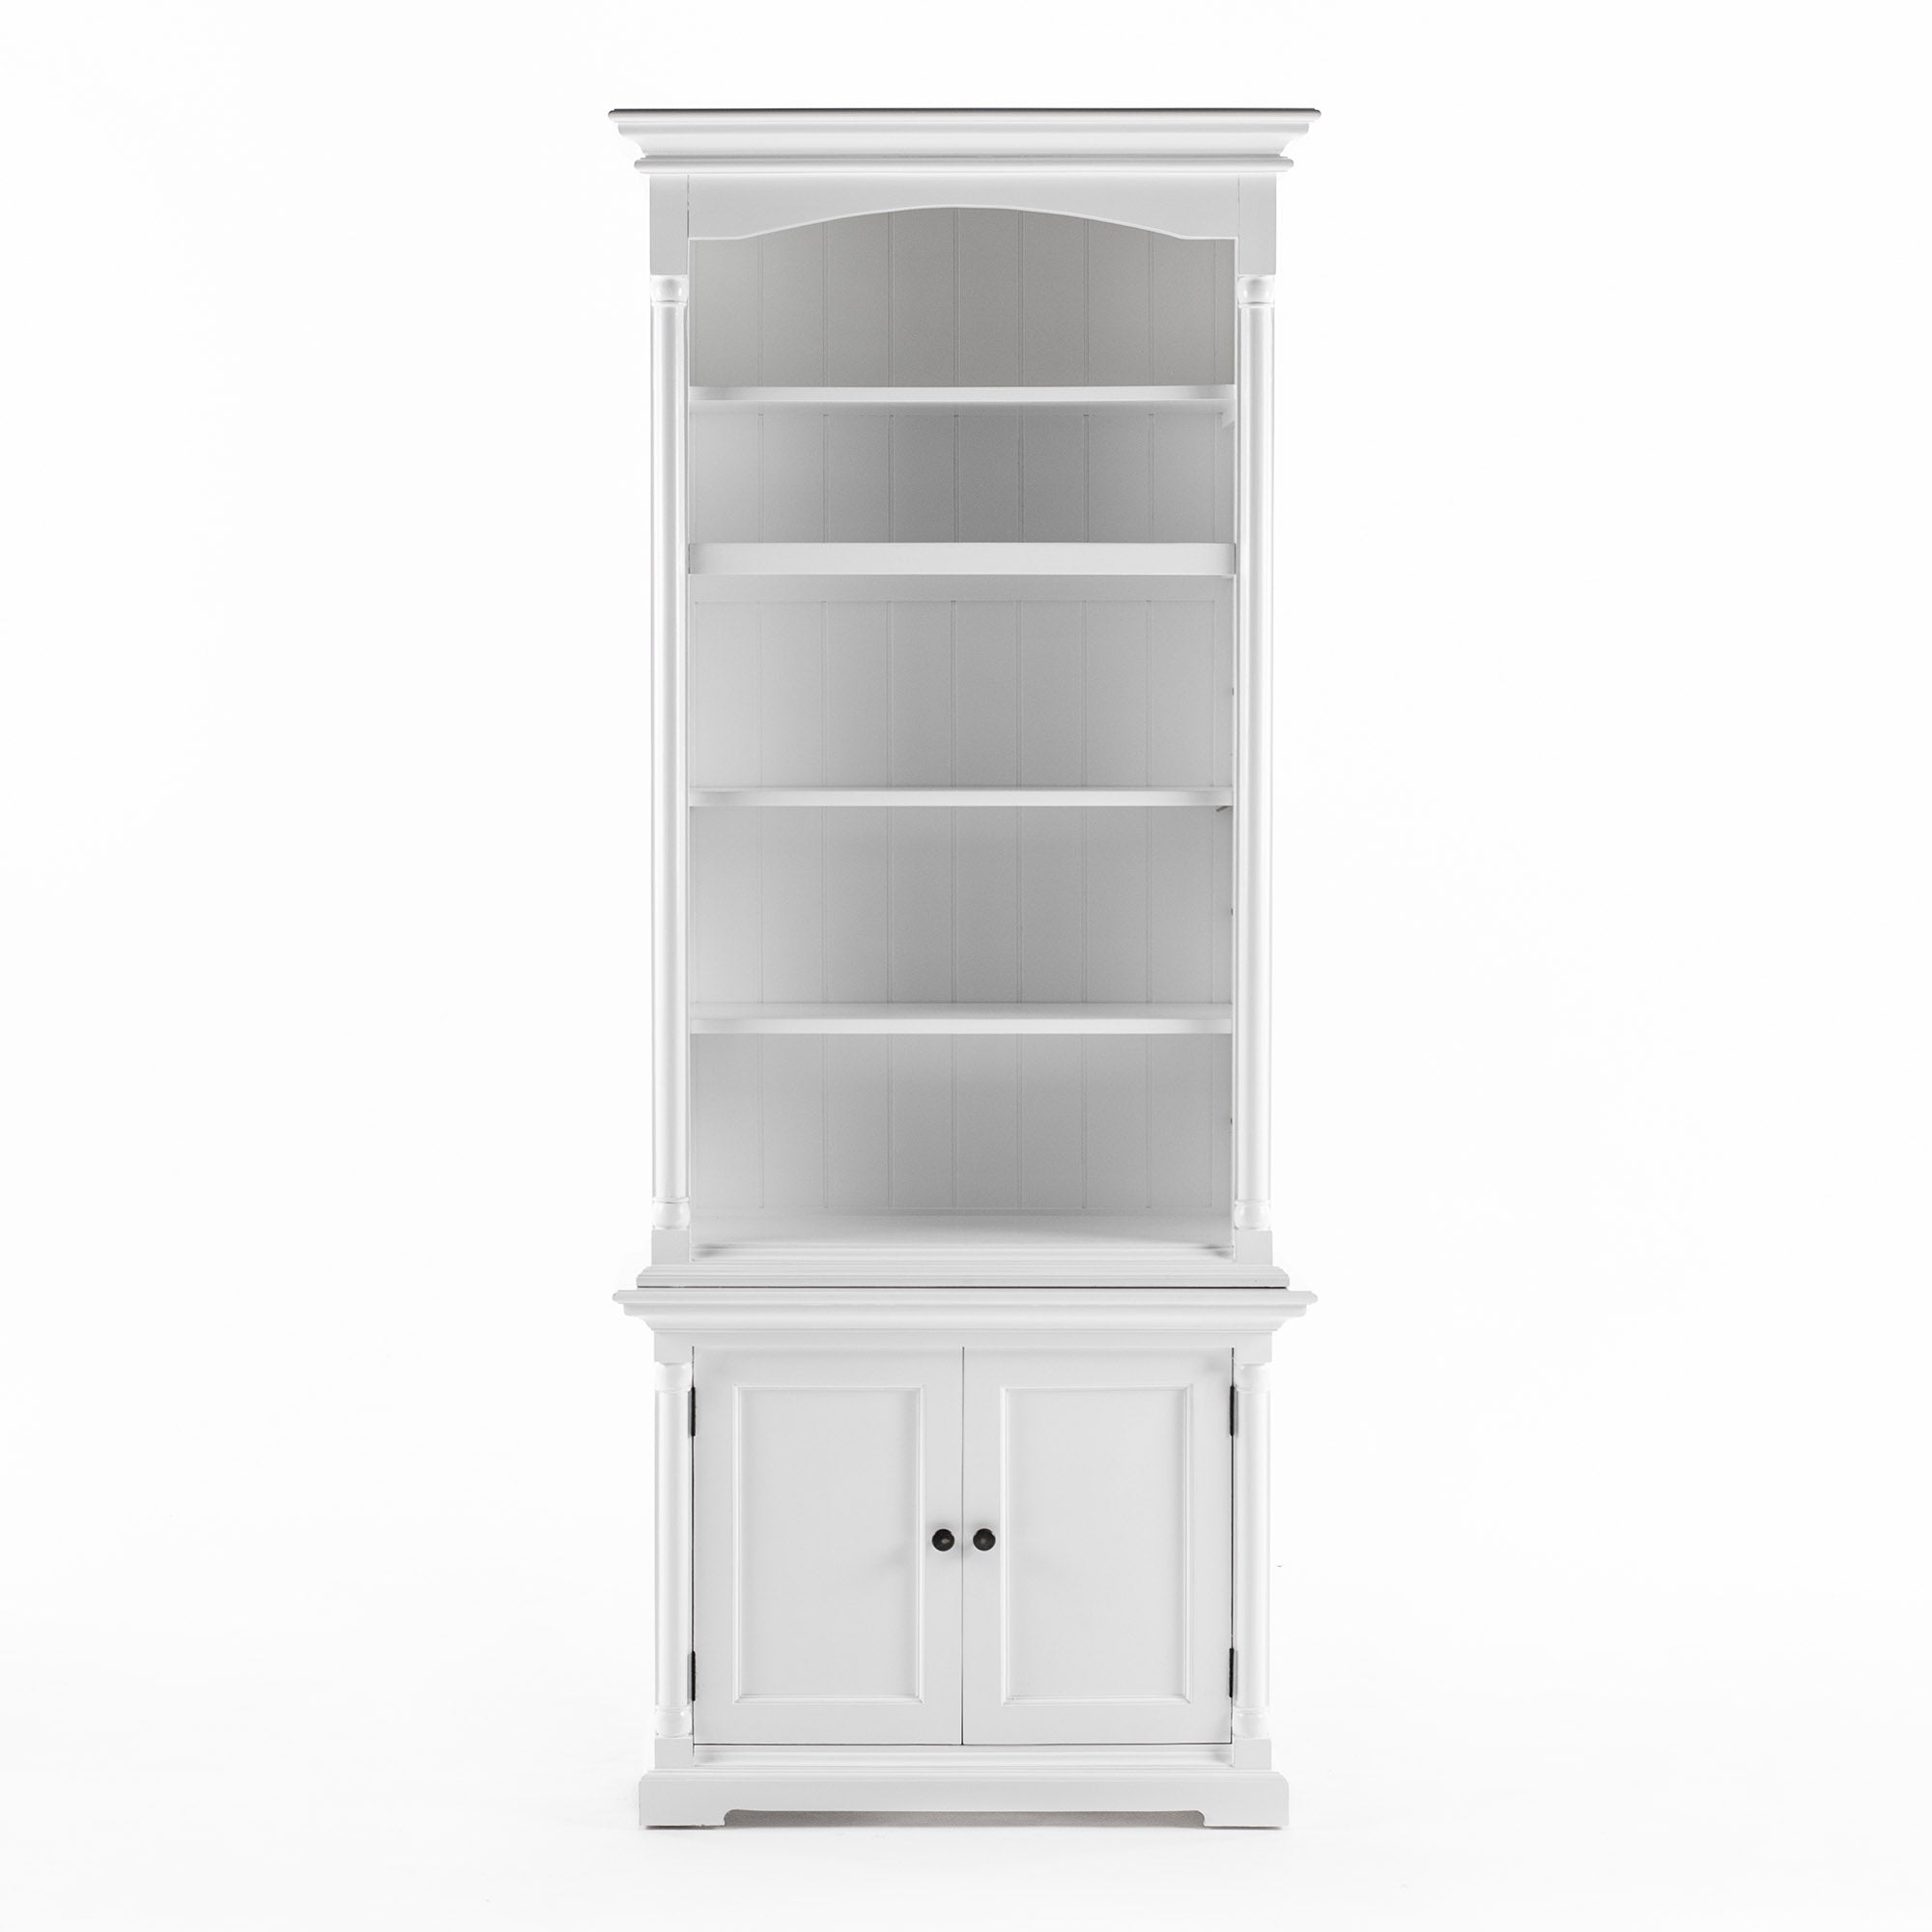 Provence French Country White Single-Bay Hutch Unit